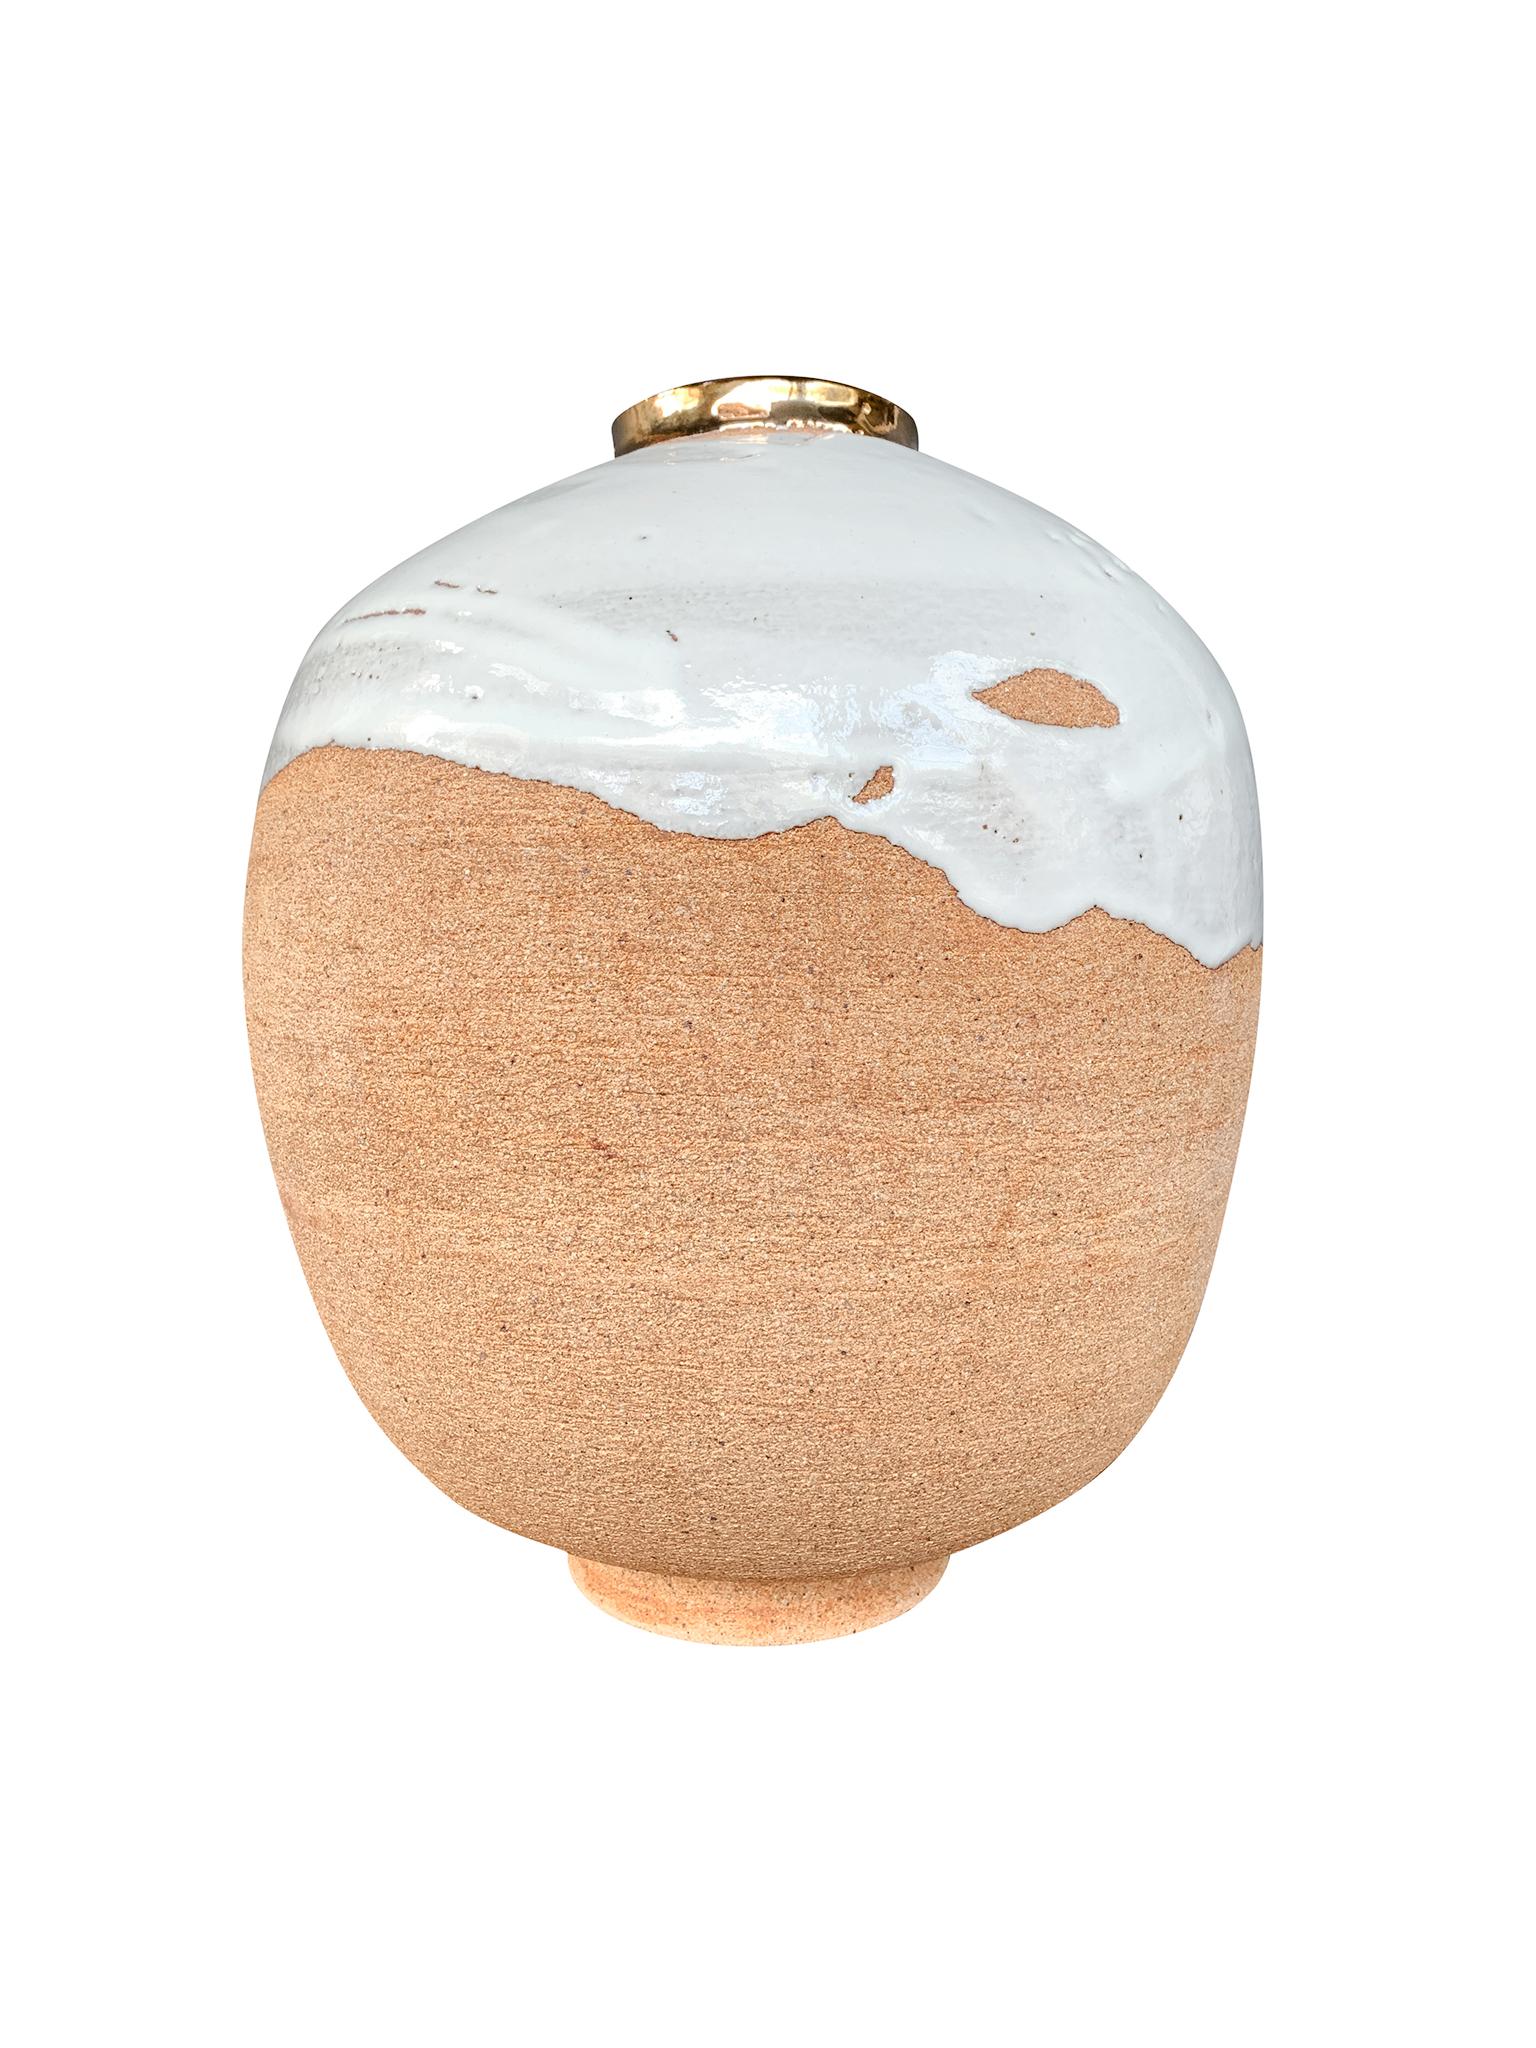 From Thom Lussier's Golden Patina Collection - a series of ceramic vessels with rich, colorful surfaces that evoke both terrestrial and otherworldly terrain. #5 is round in form with a lipped opening rimmed in a gold finish. Its top half has a white